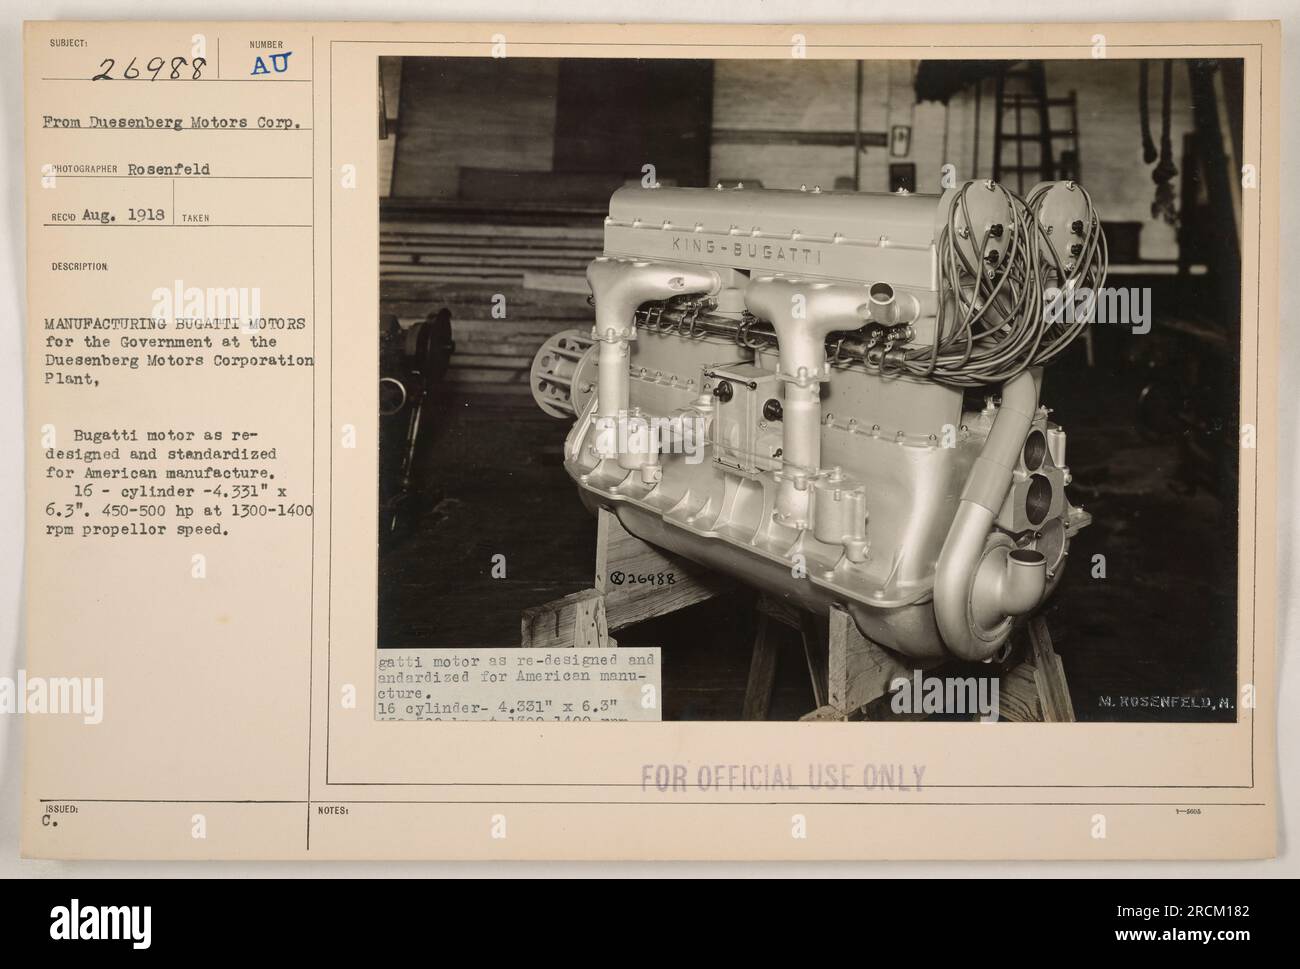 'Photograph showing a Bugatti motor being manufactured for the American government at the Duesenberg Motors Corporation Plant in Aug. 1918. The Bugatti motor has been redesigned and standardized for American manufacture, with specifications of 16 cylinders, 4.331' x 6.3', producing 450-500 horsepower at 1300-1400 rpm propeller speed.' Stock Photo